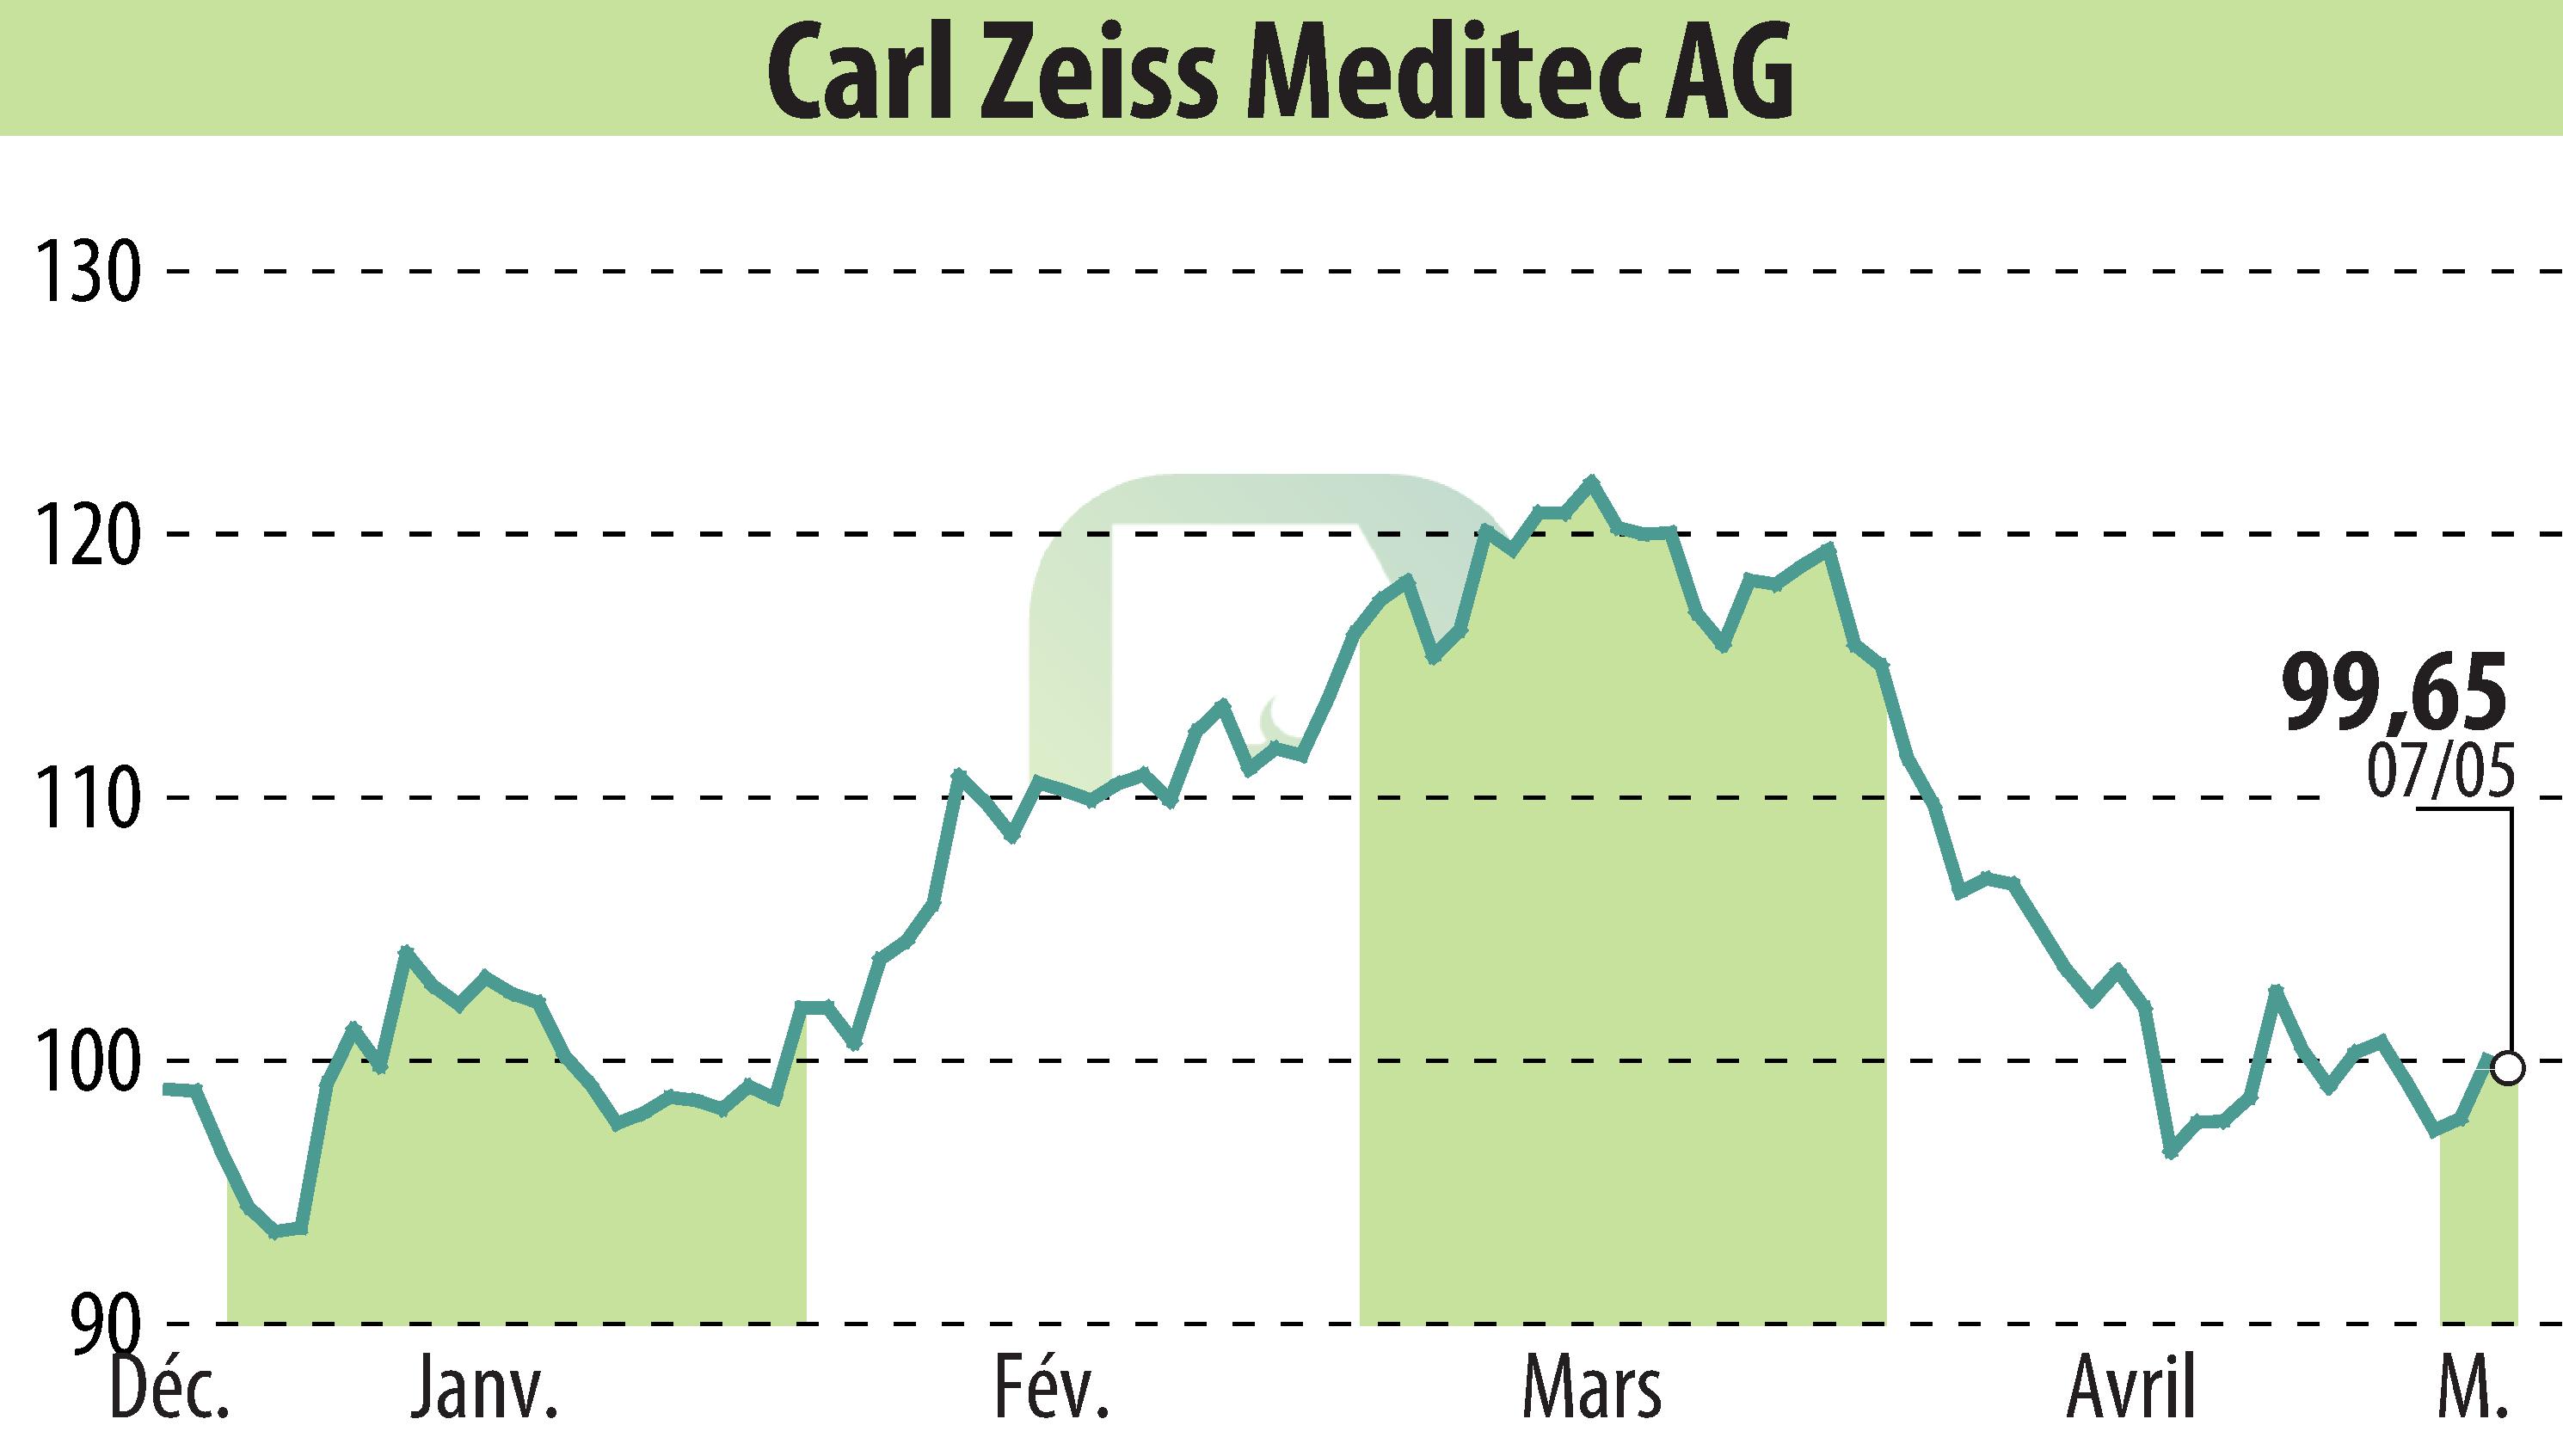 Stock price chart of Carl Zeiss Meditec AG (EBR:AFX) showing fluctuations.